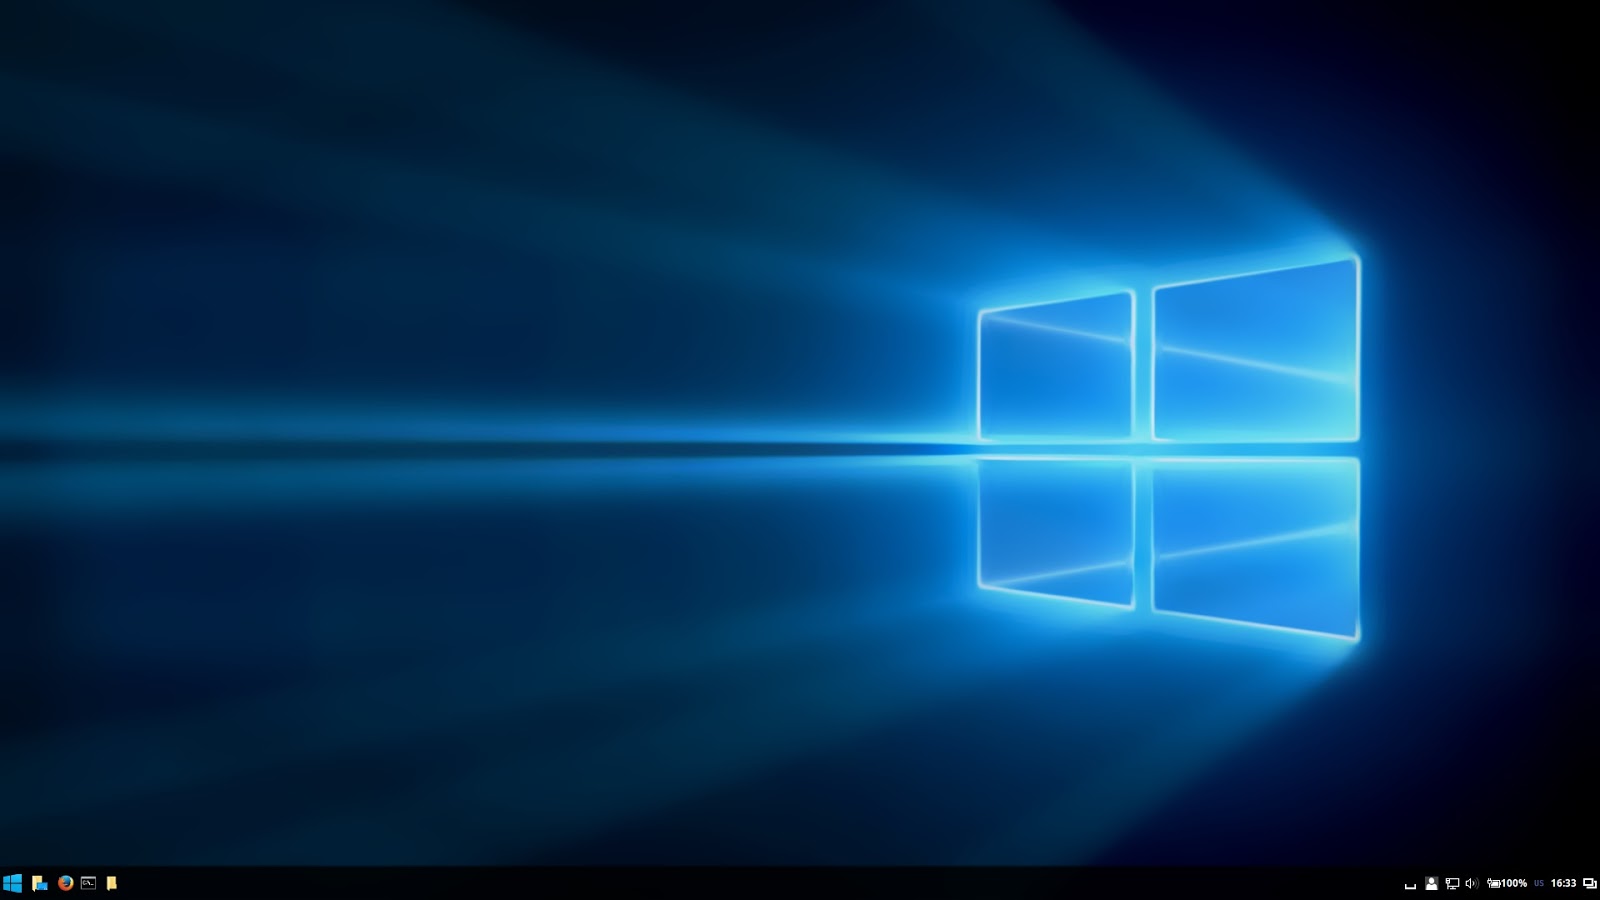 Do you like Windows 10 Look but Love LINUX? Here are Windows 10 GTK